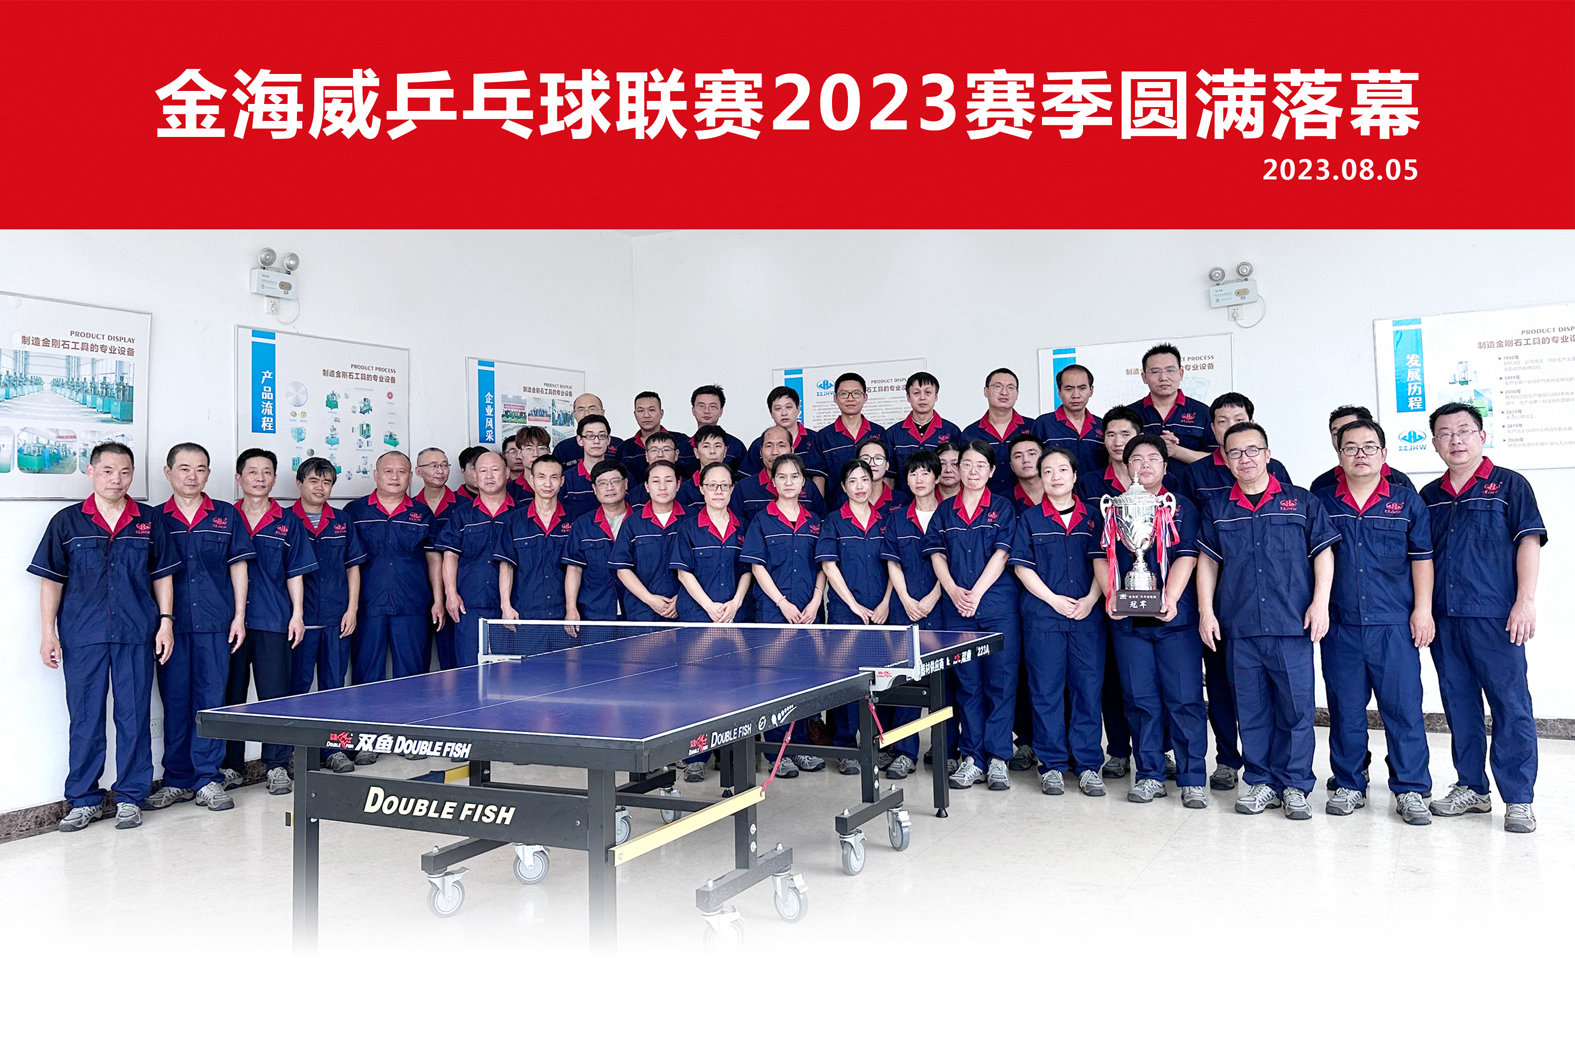 GoldenHighway Table Tennis League 2023 season ended successfully